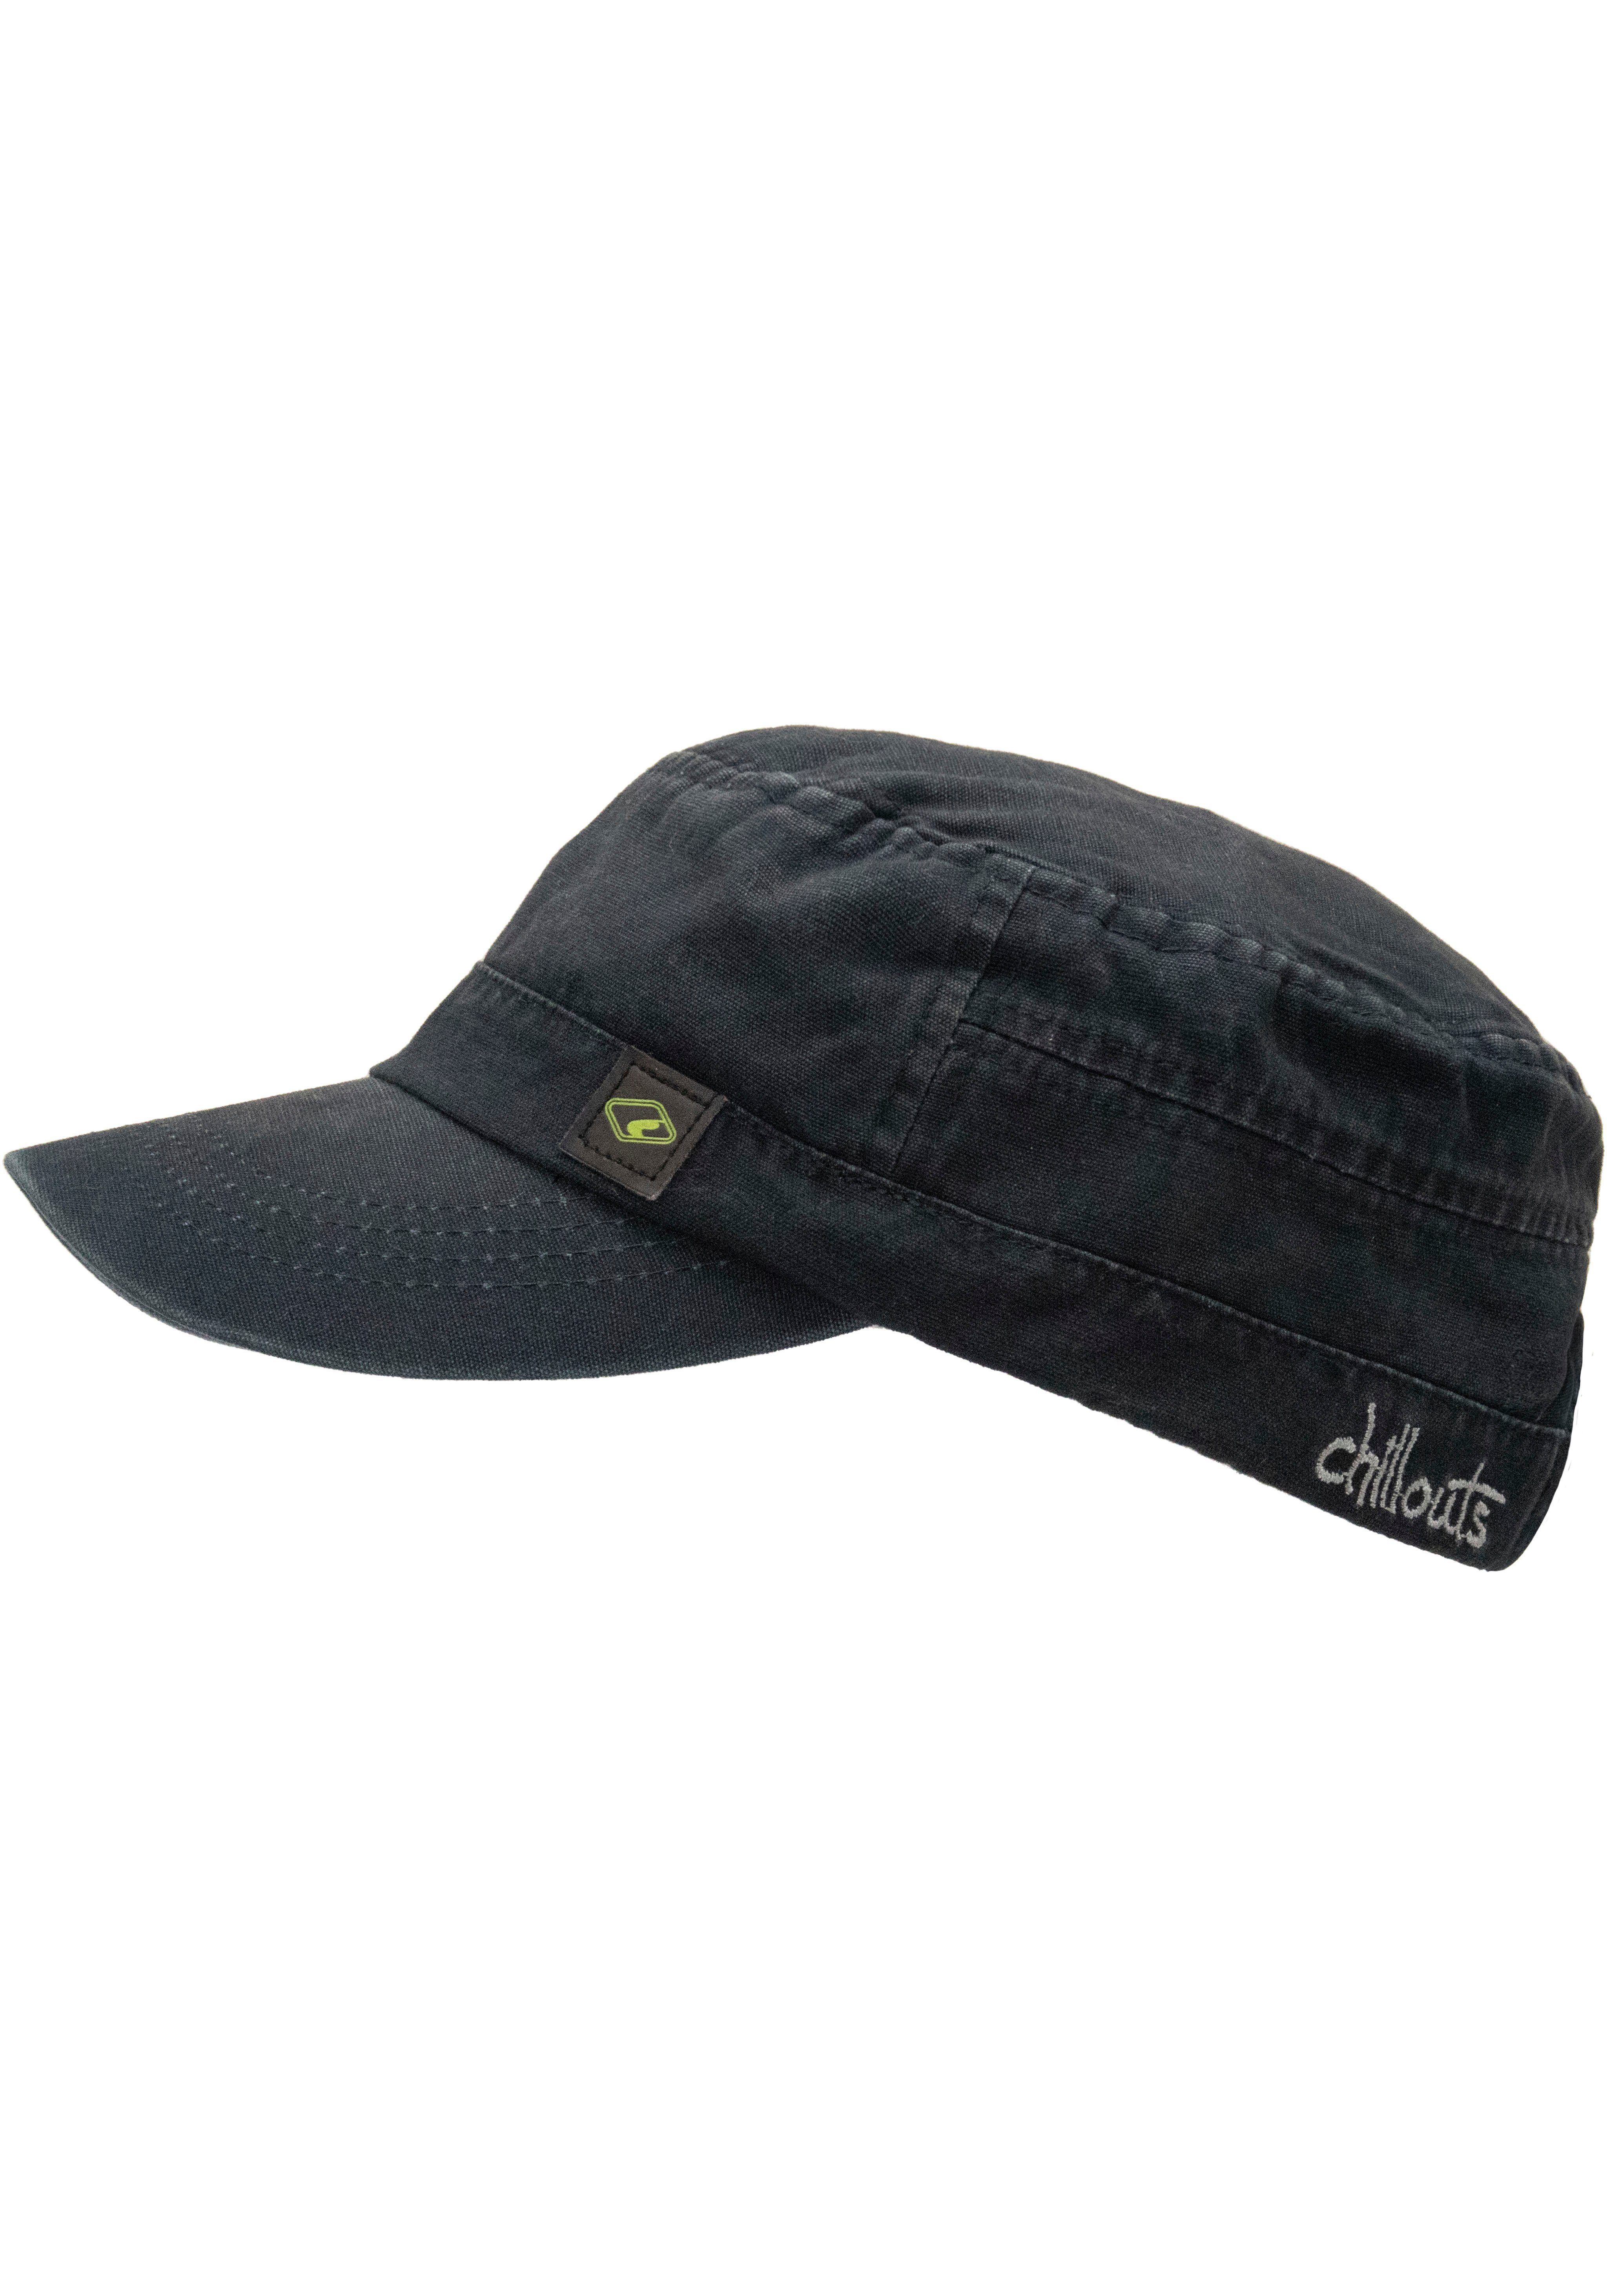 chillouts Army Cap El Paso Hat aus reiner Baumwolle, atmungsaktiv, One Size washed navy | Army Caps